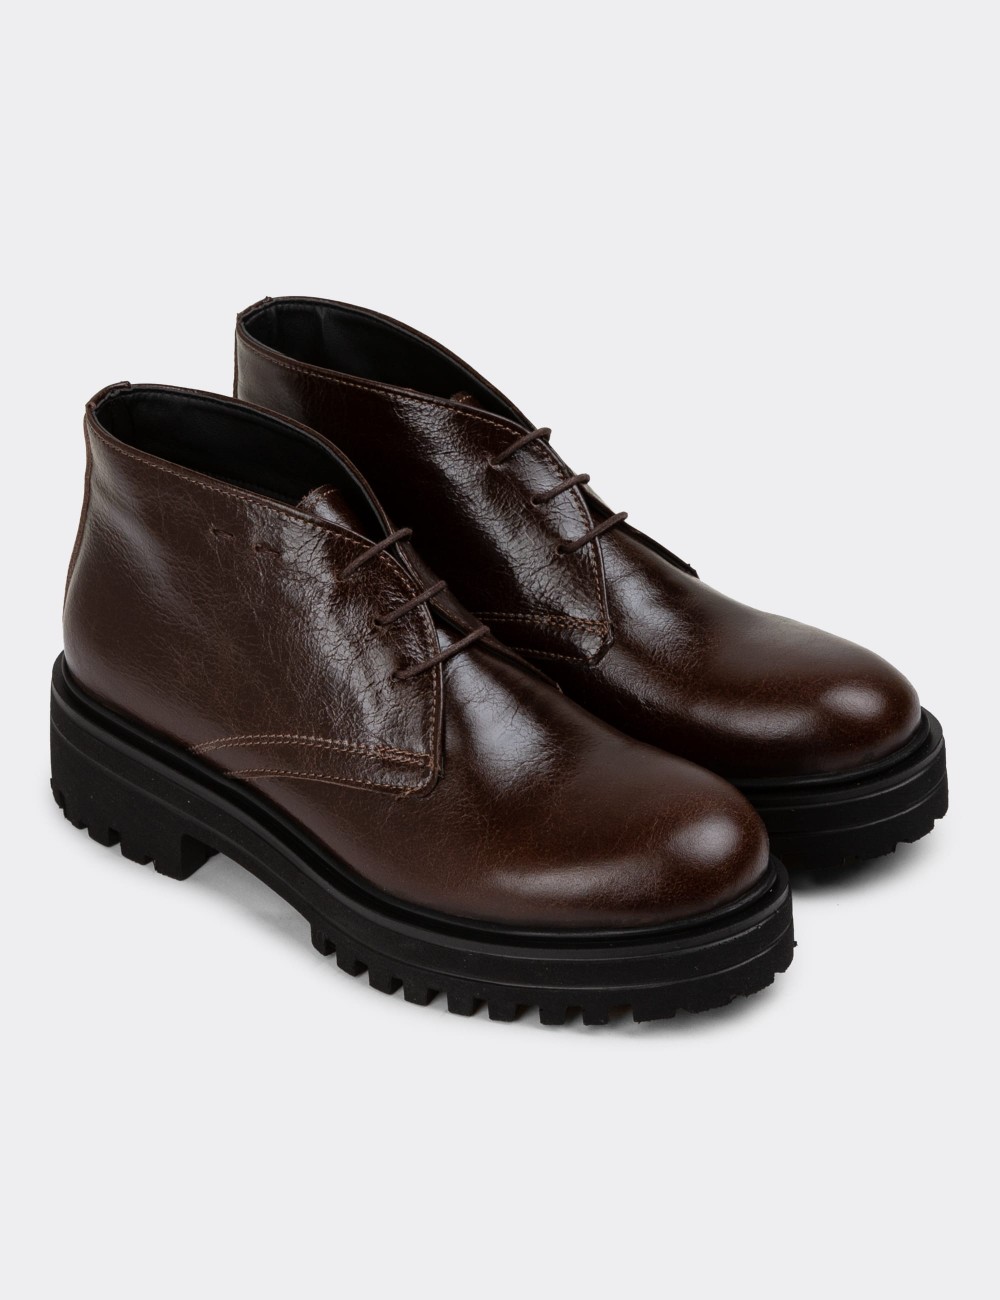 Brown Patent Leather Desert Boots - 01847ZKHVE03